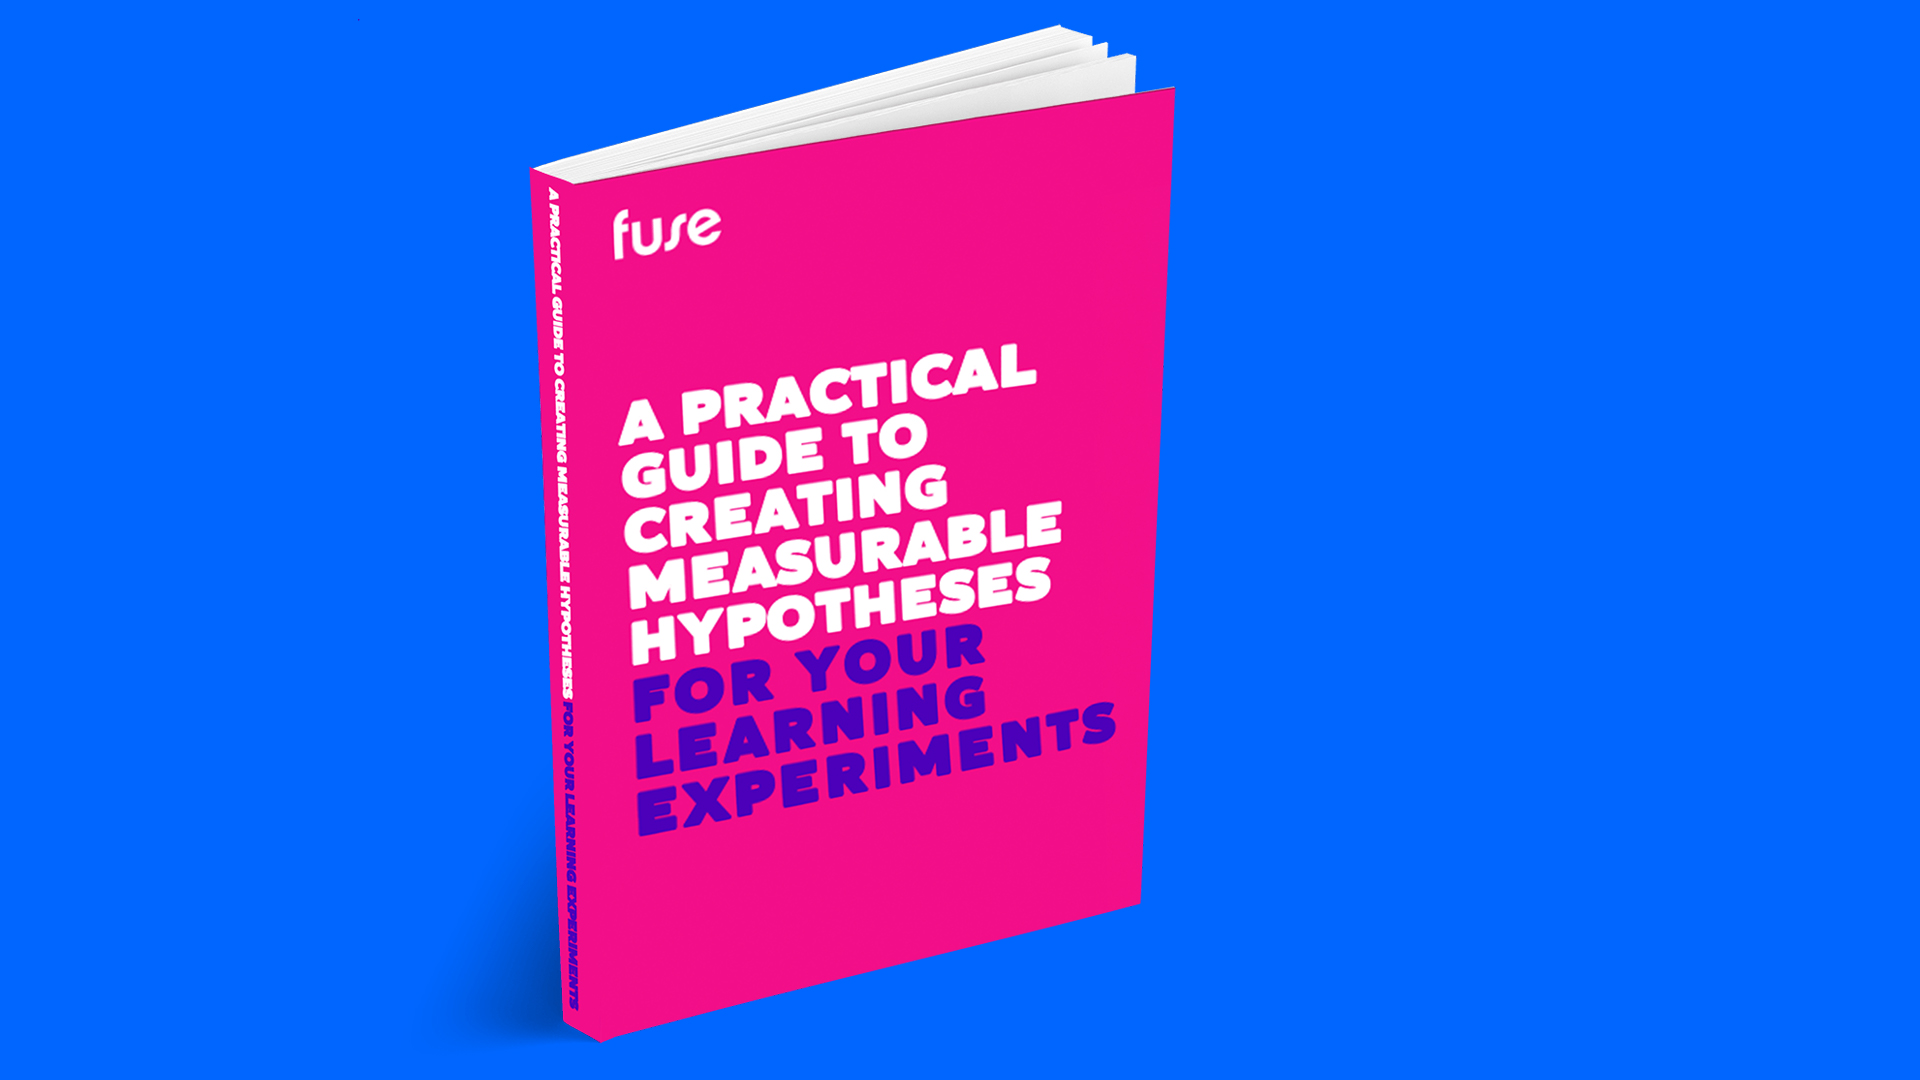 A Practical Guide to Creating Measurable Hypotheses for Learning Experiments